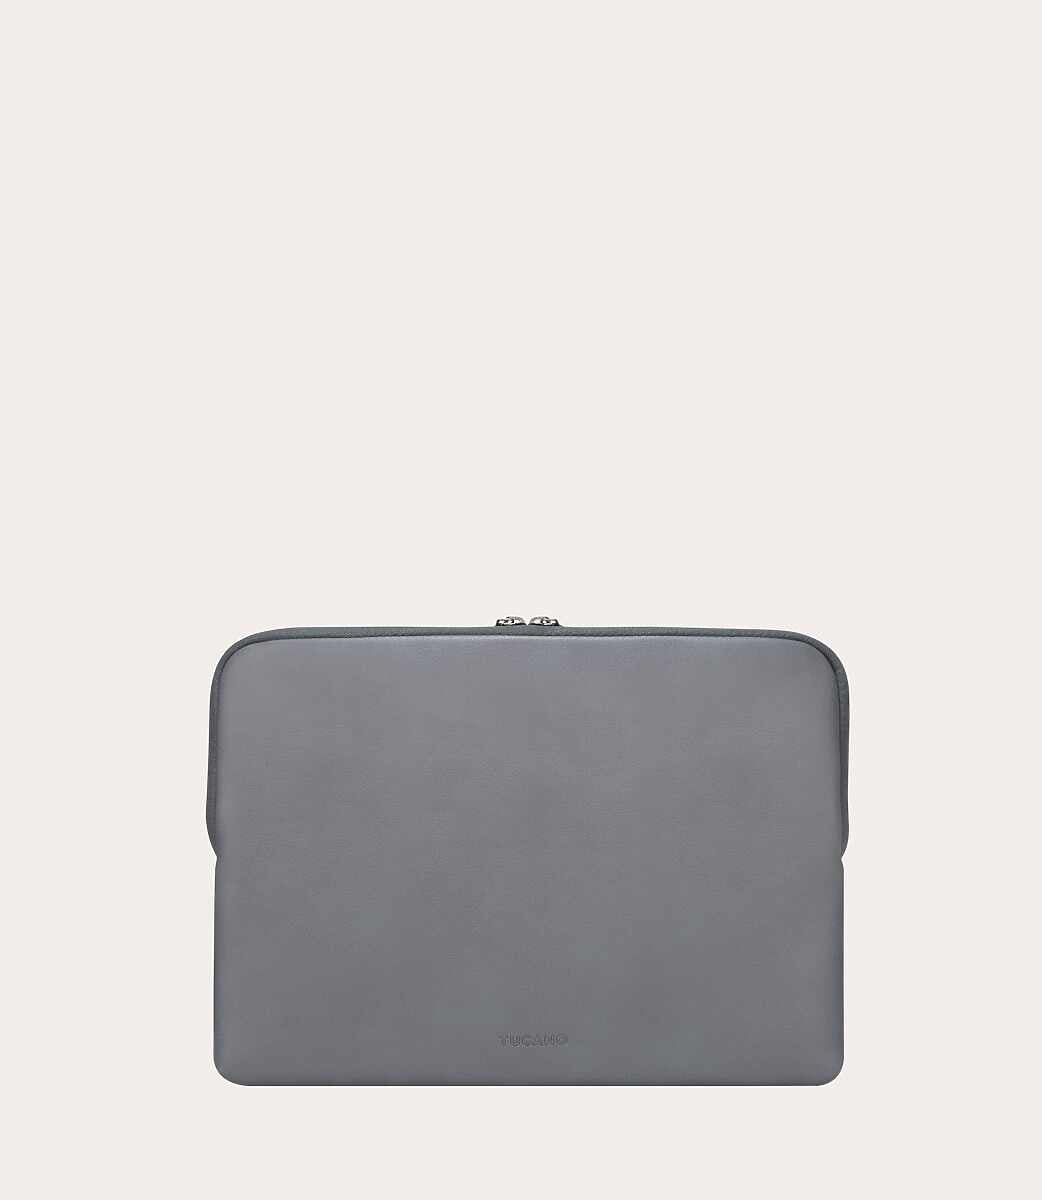 Tucano Sleeve for Laptop 12" and MacBook up to 14"